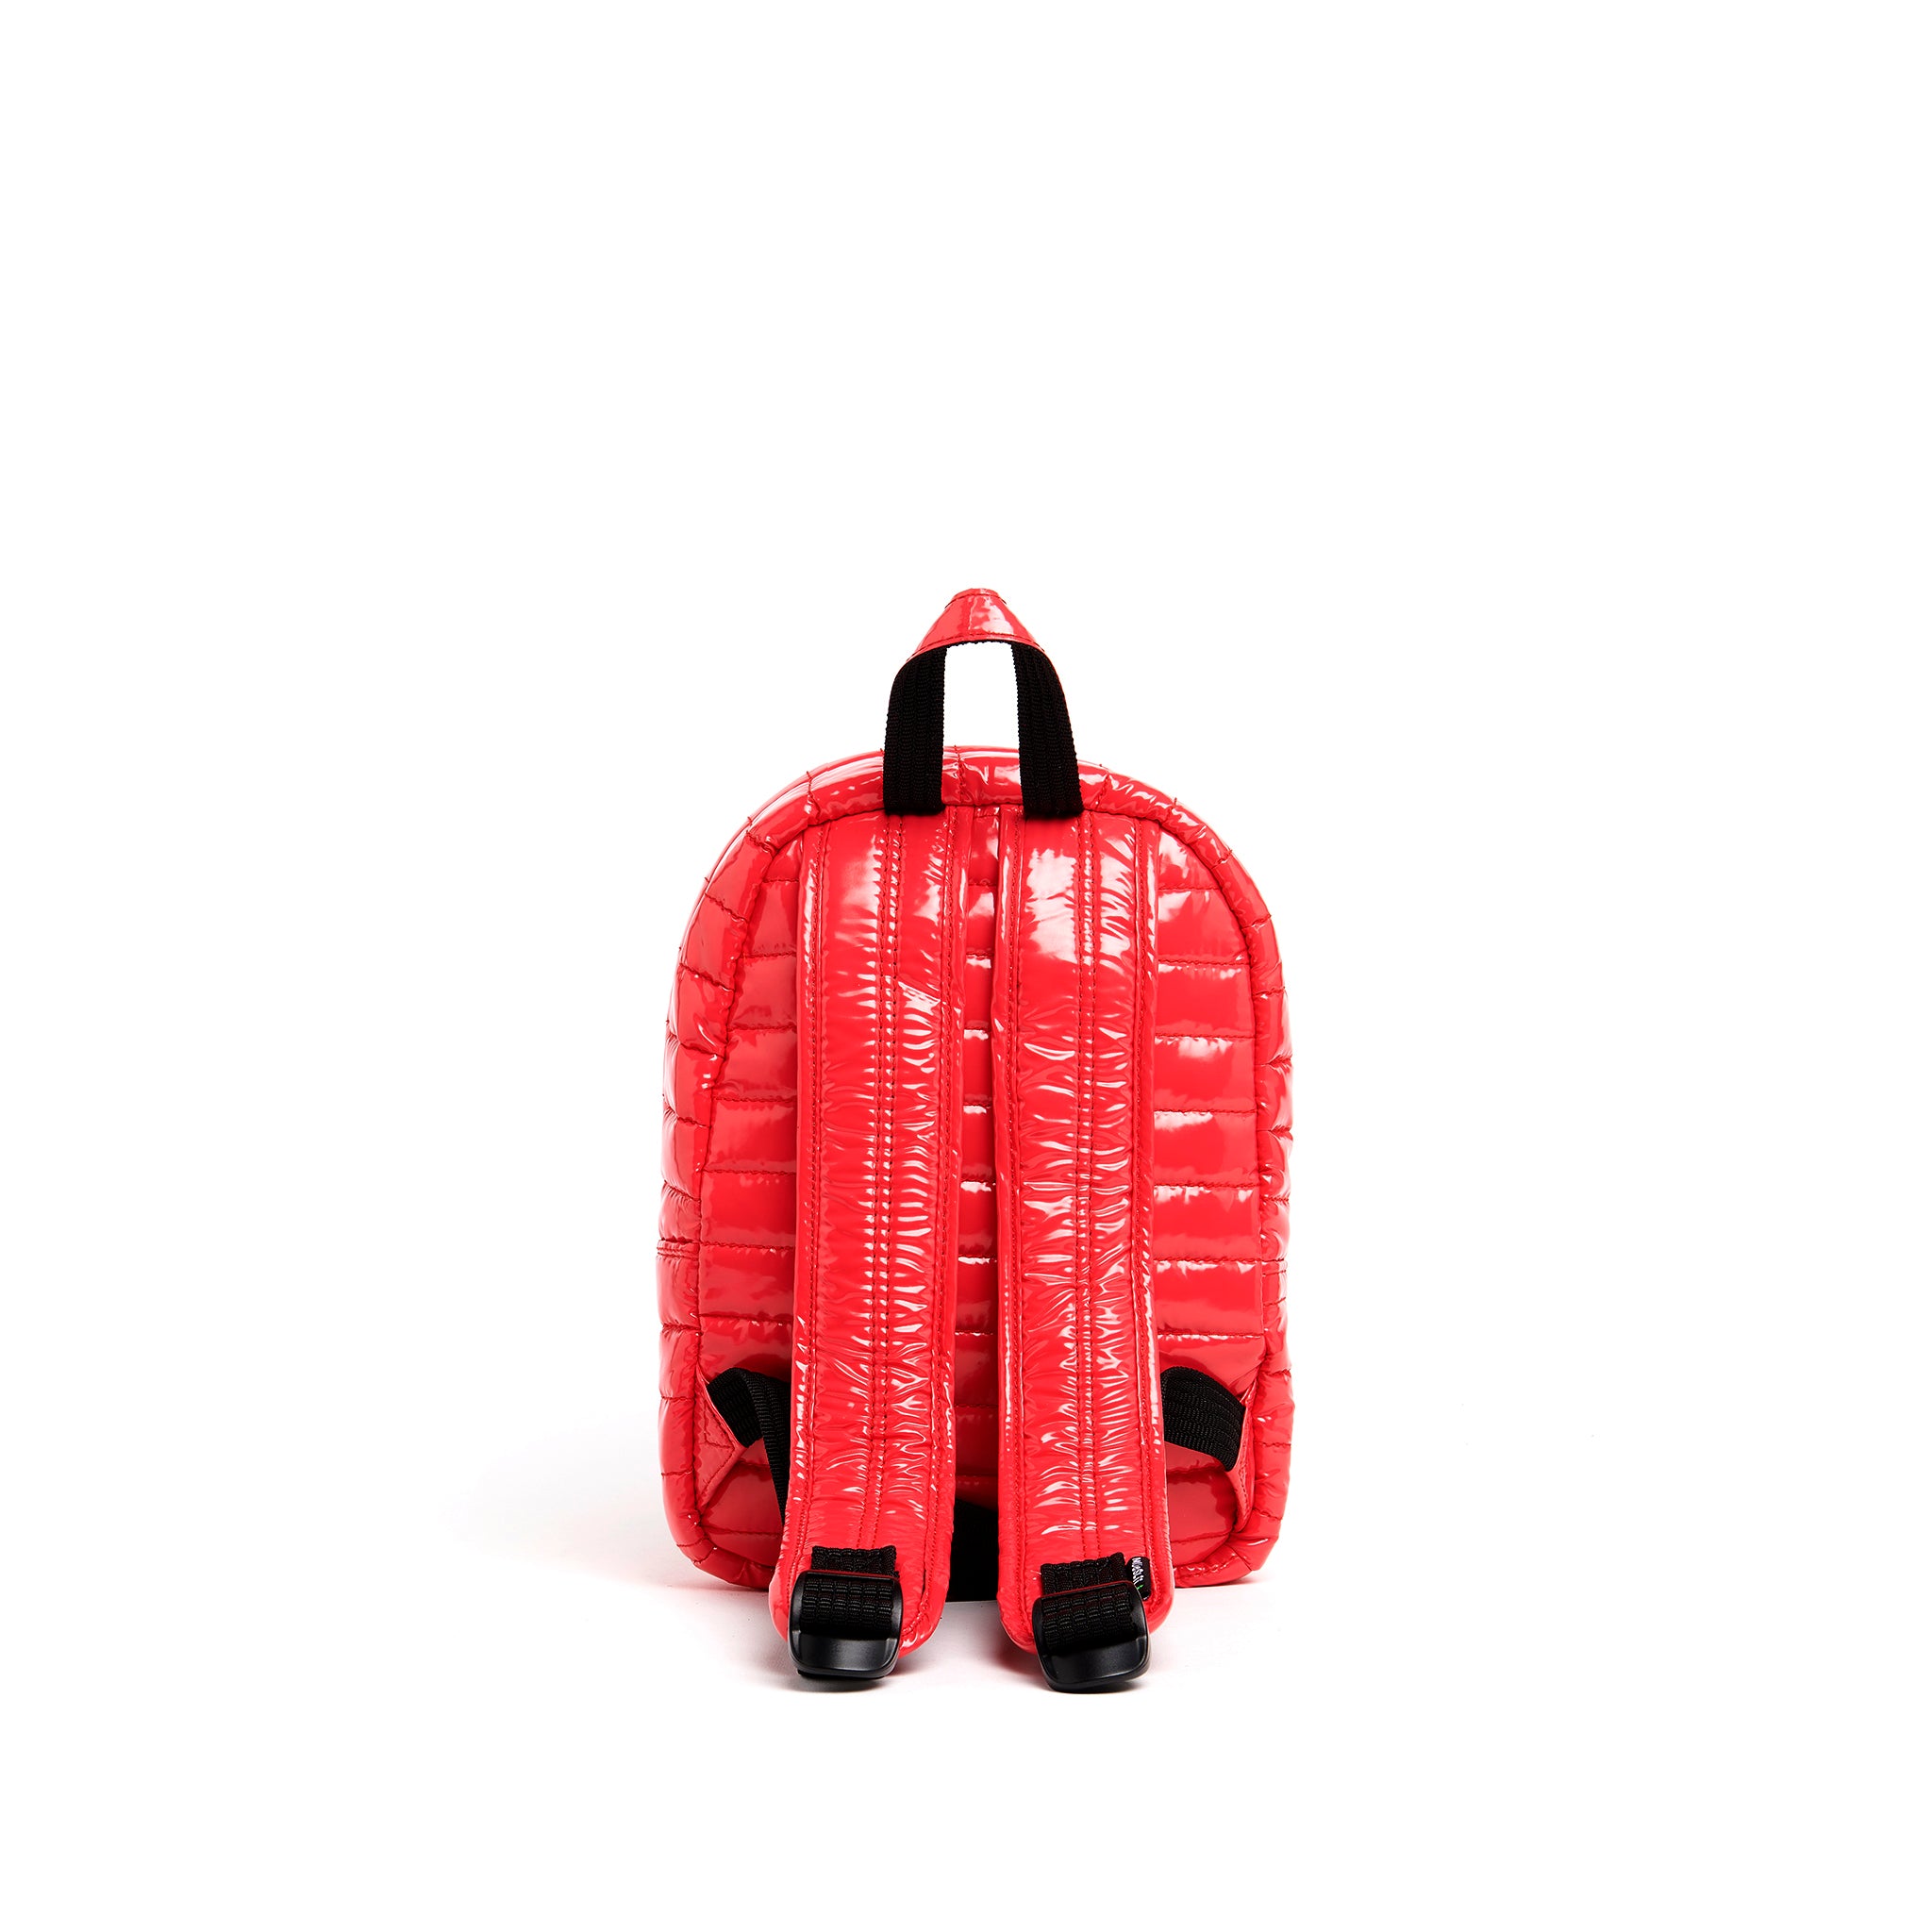 Mueslii original puffer Mini pack made of high density nylon and Ykk zips, color metal red, back view.